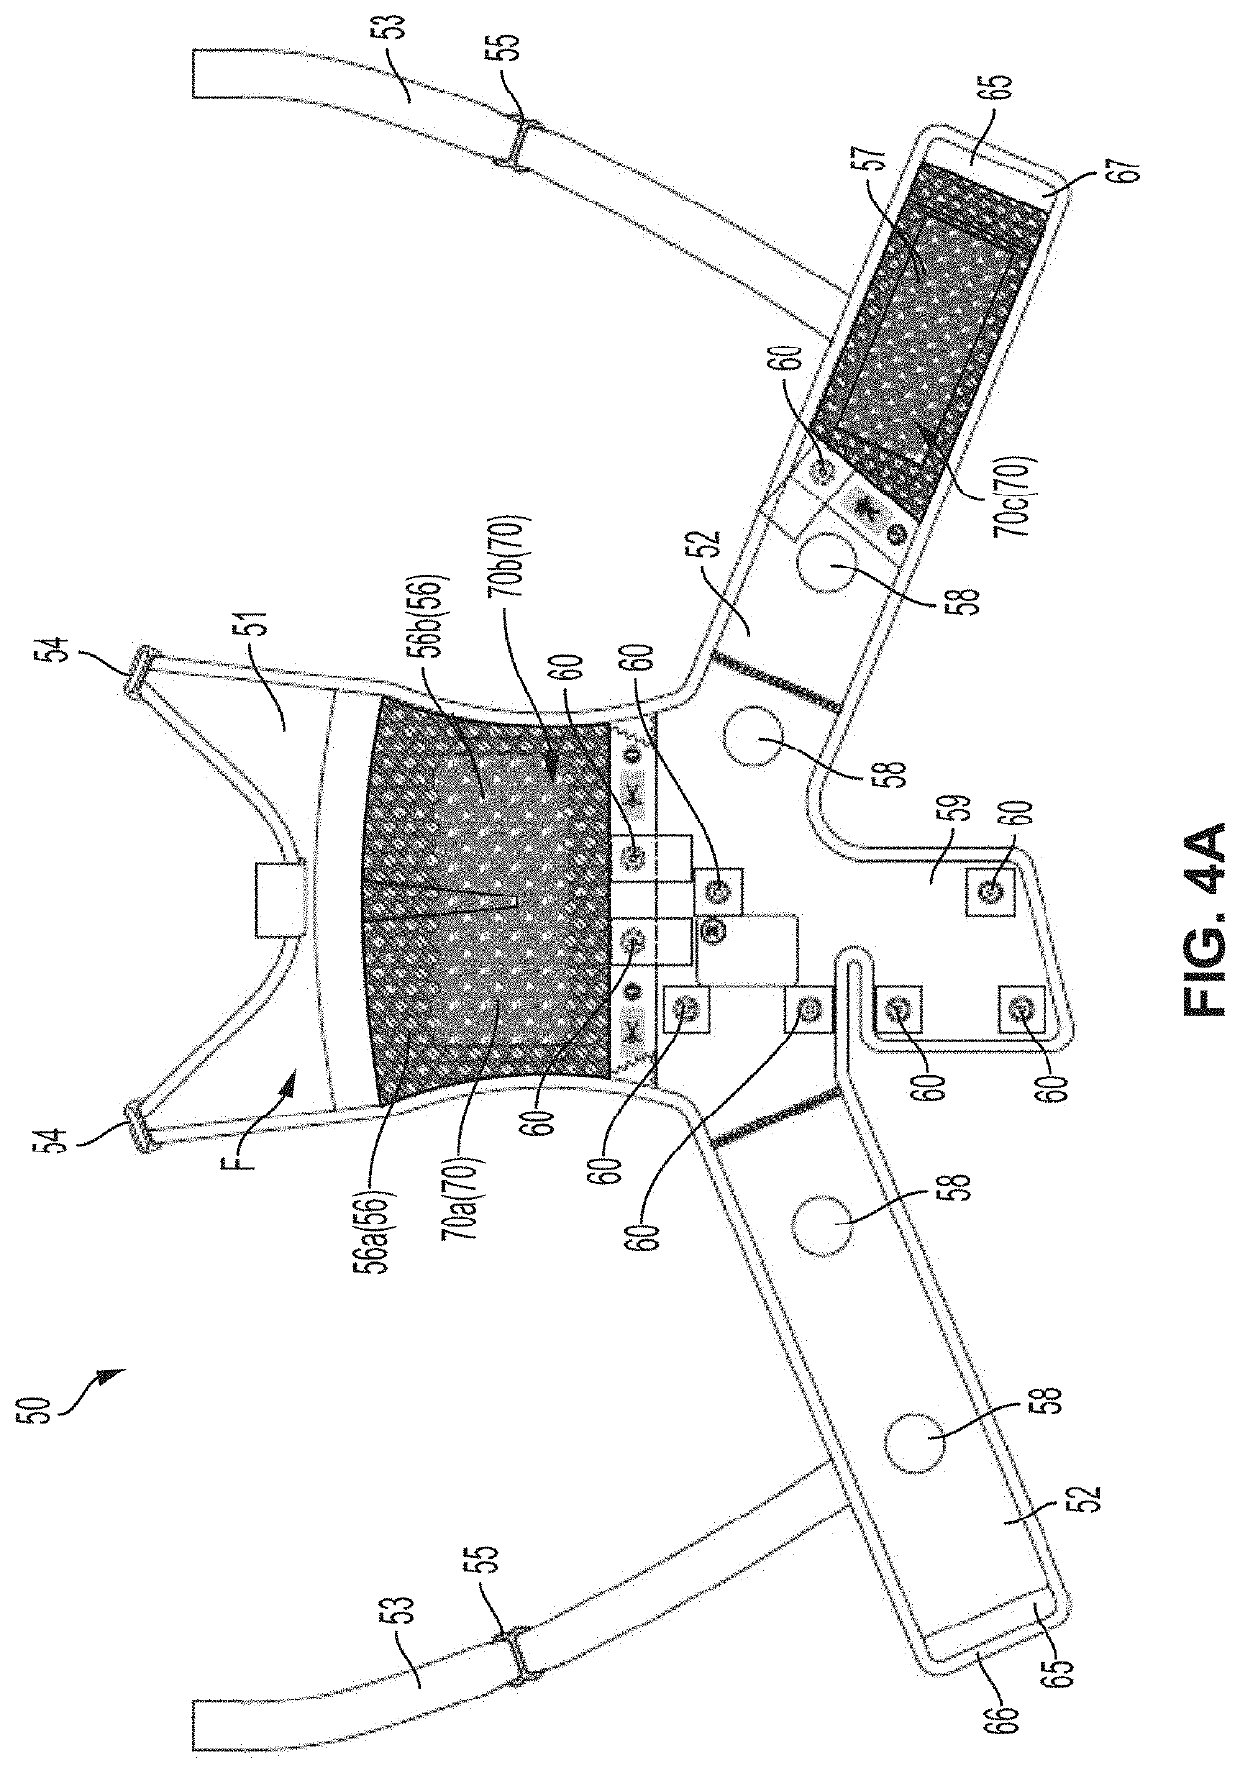 Therapy Electrode Mesh Interface for Wearable Cardiac Therapeutic Devices